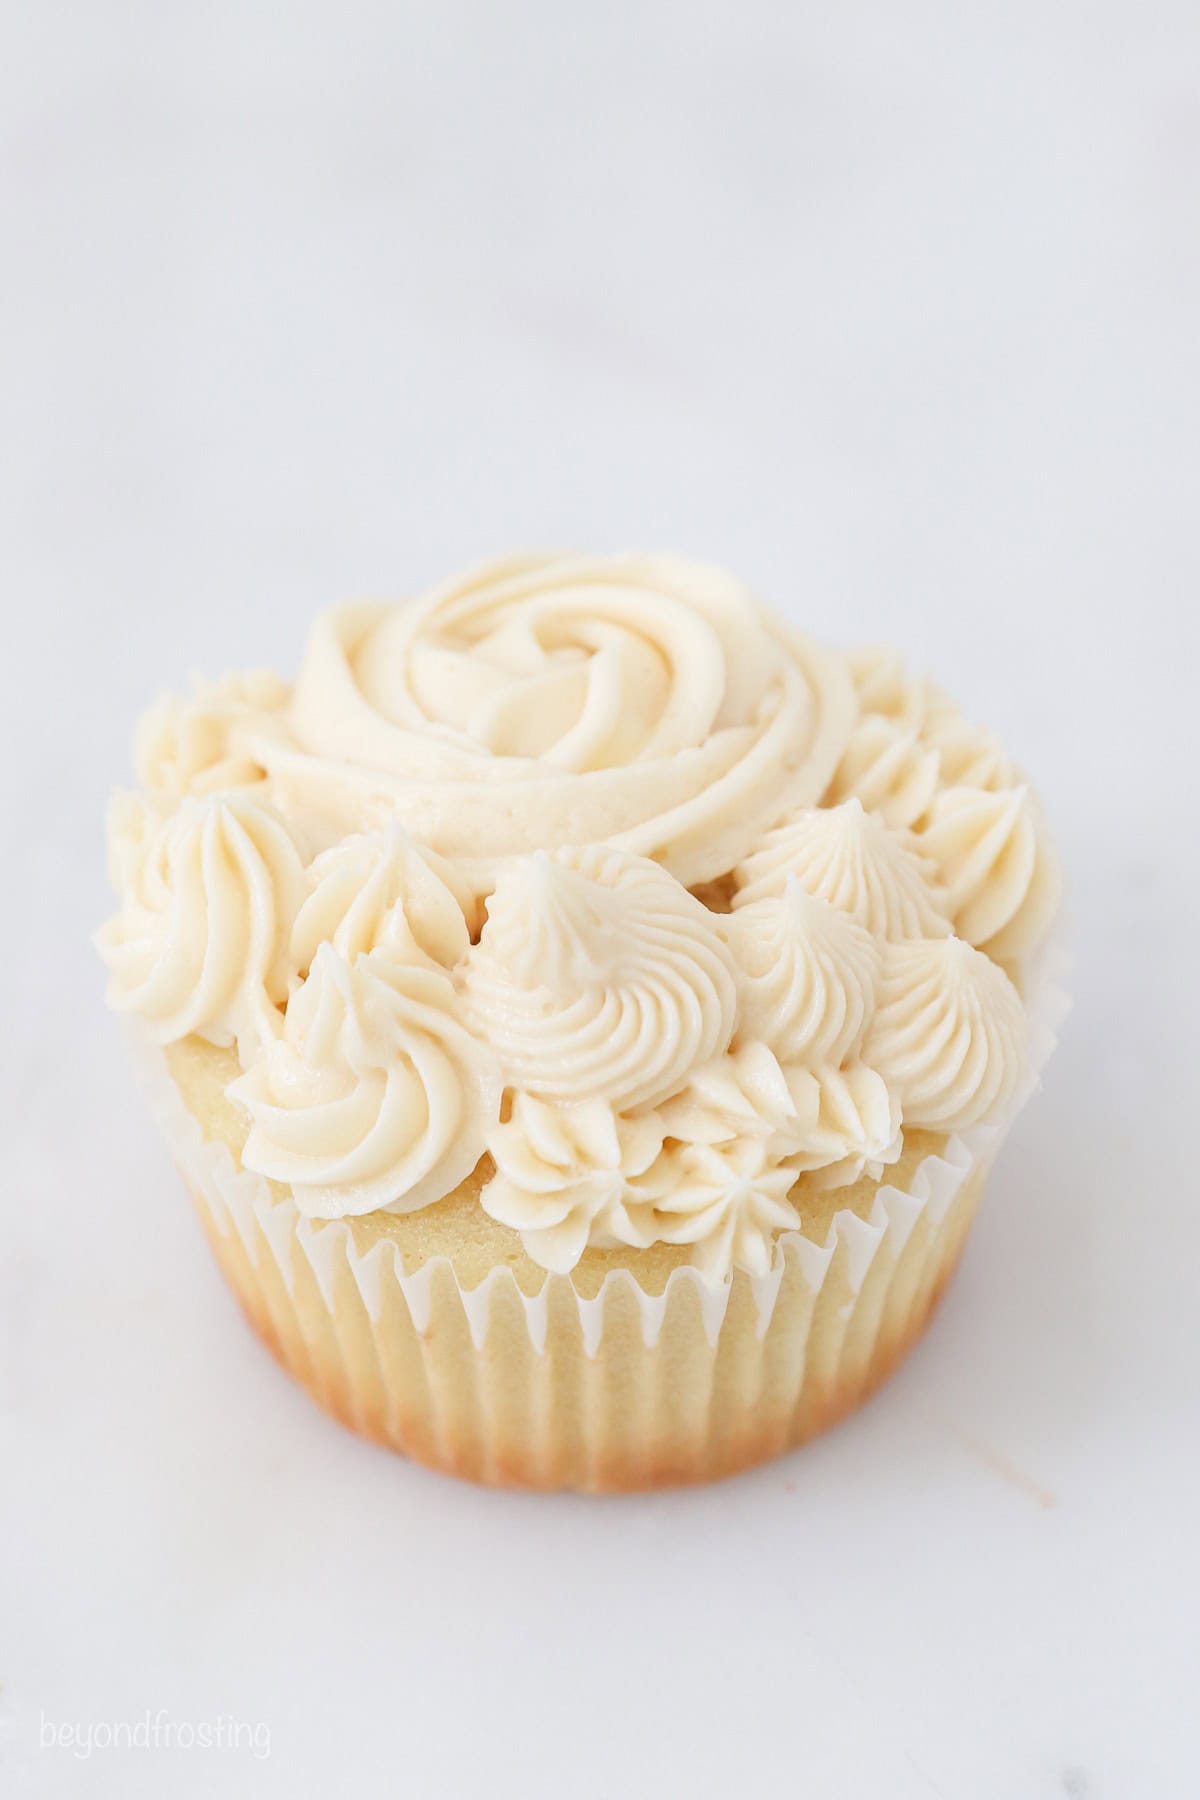 A cupcake frosted with various vanilla frosting swirls and rosettes.